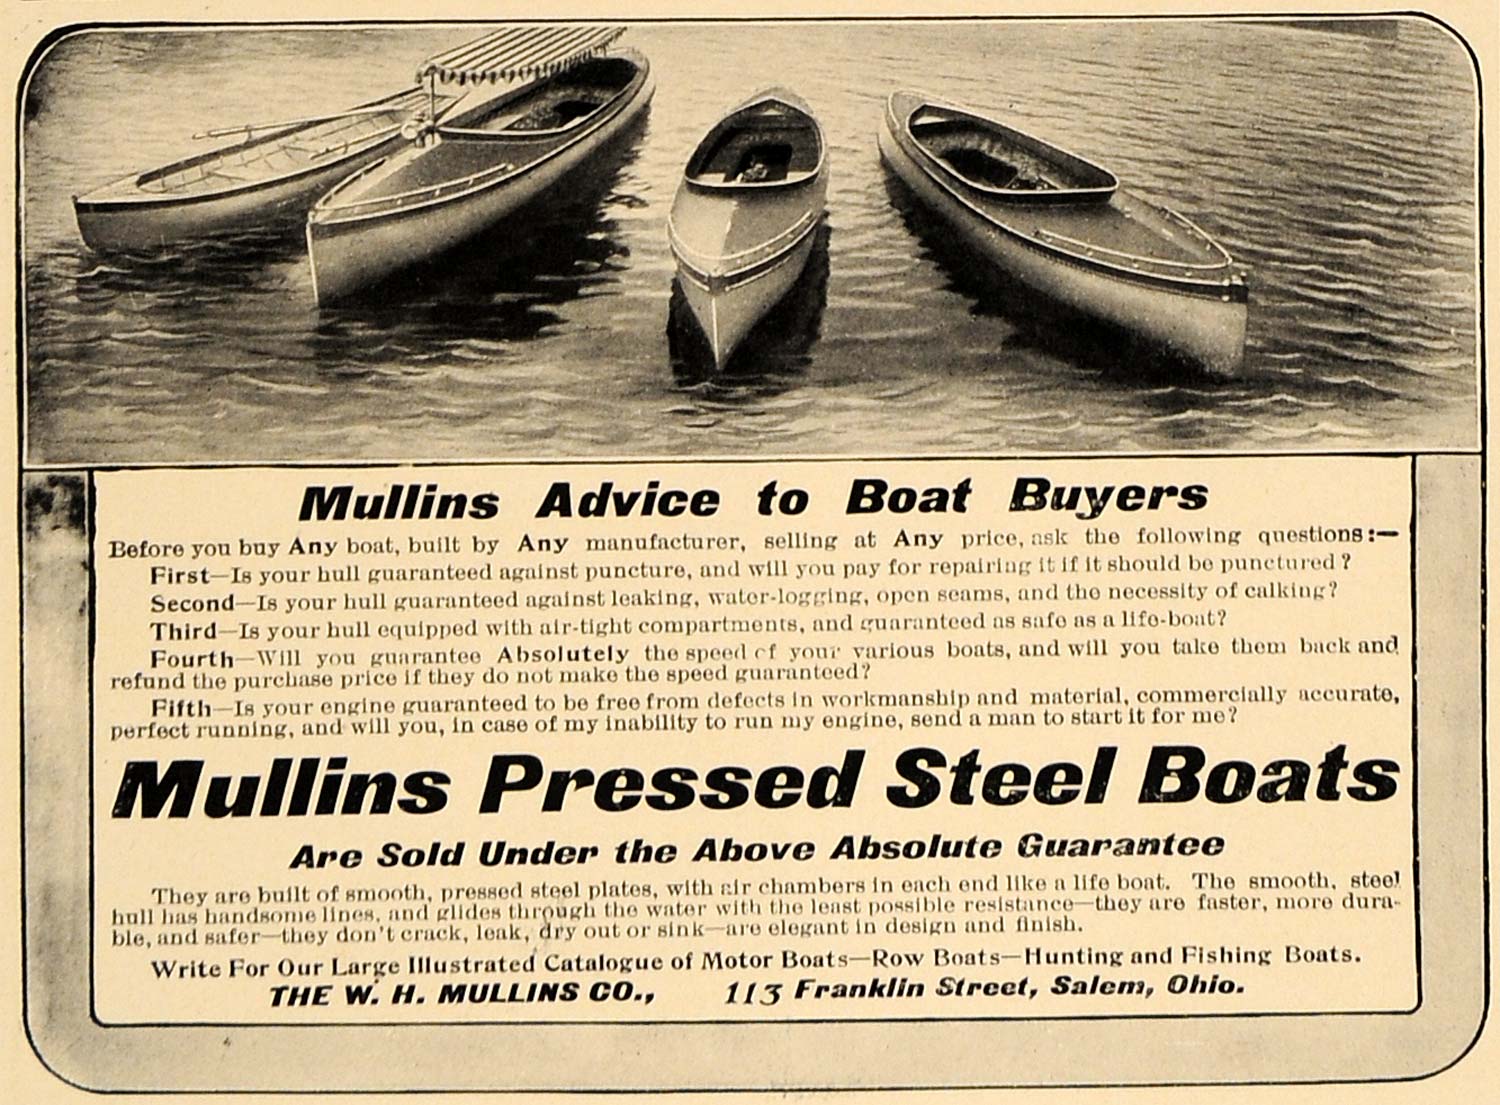 1907 Ad W.H. Mullins Pressed Steel Boats Guarantee - ORIGINAL ADVERTISING CL4